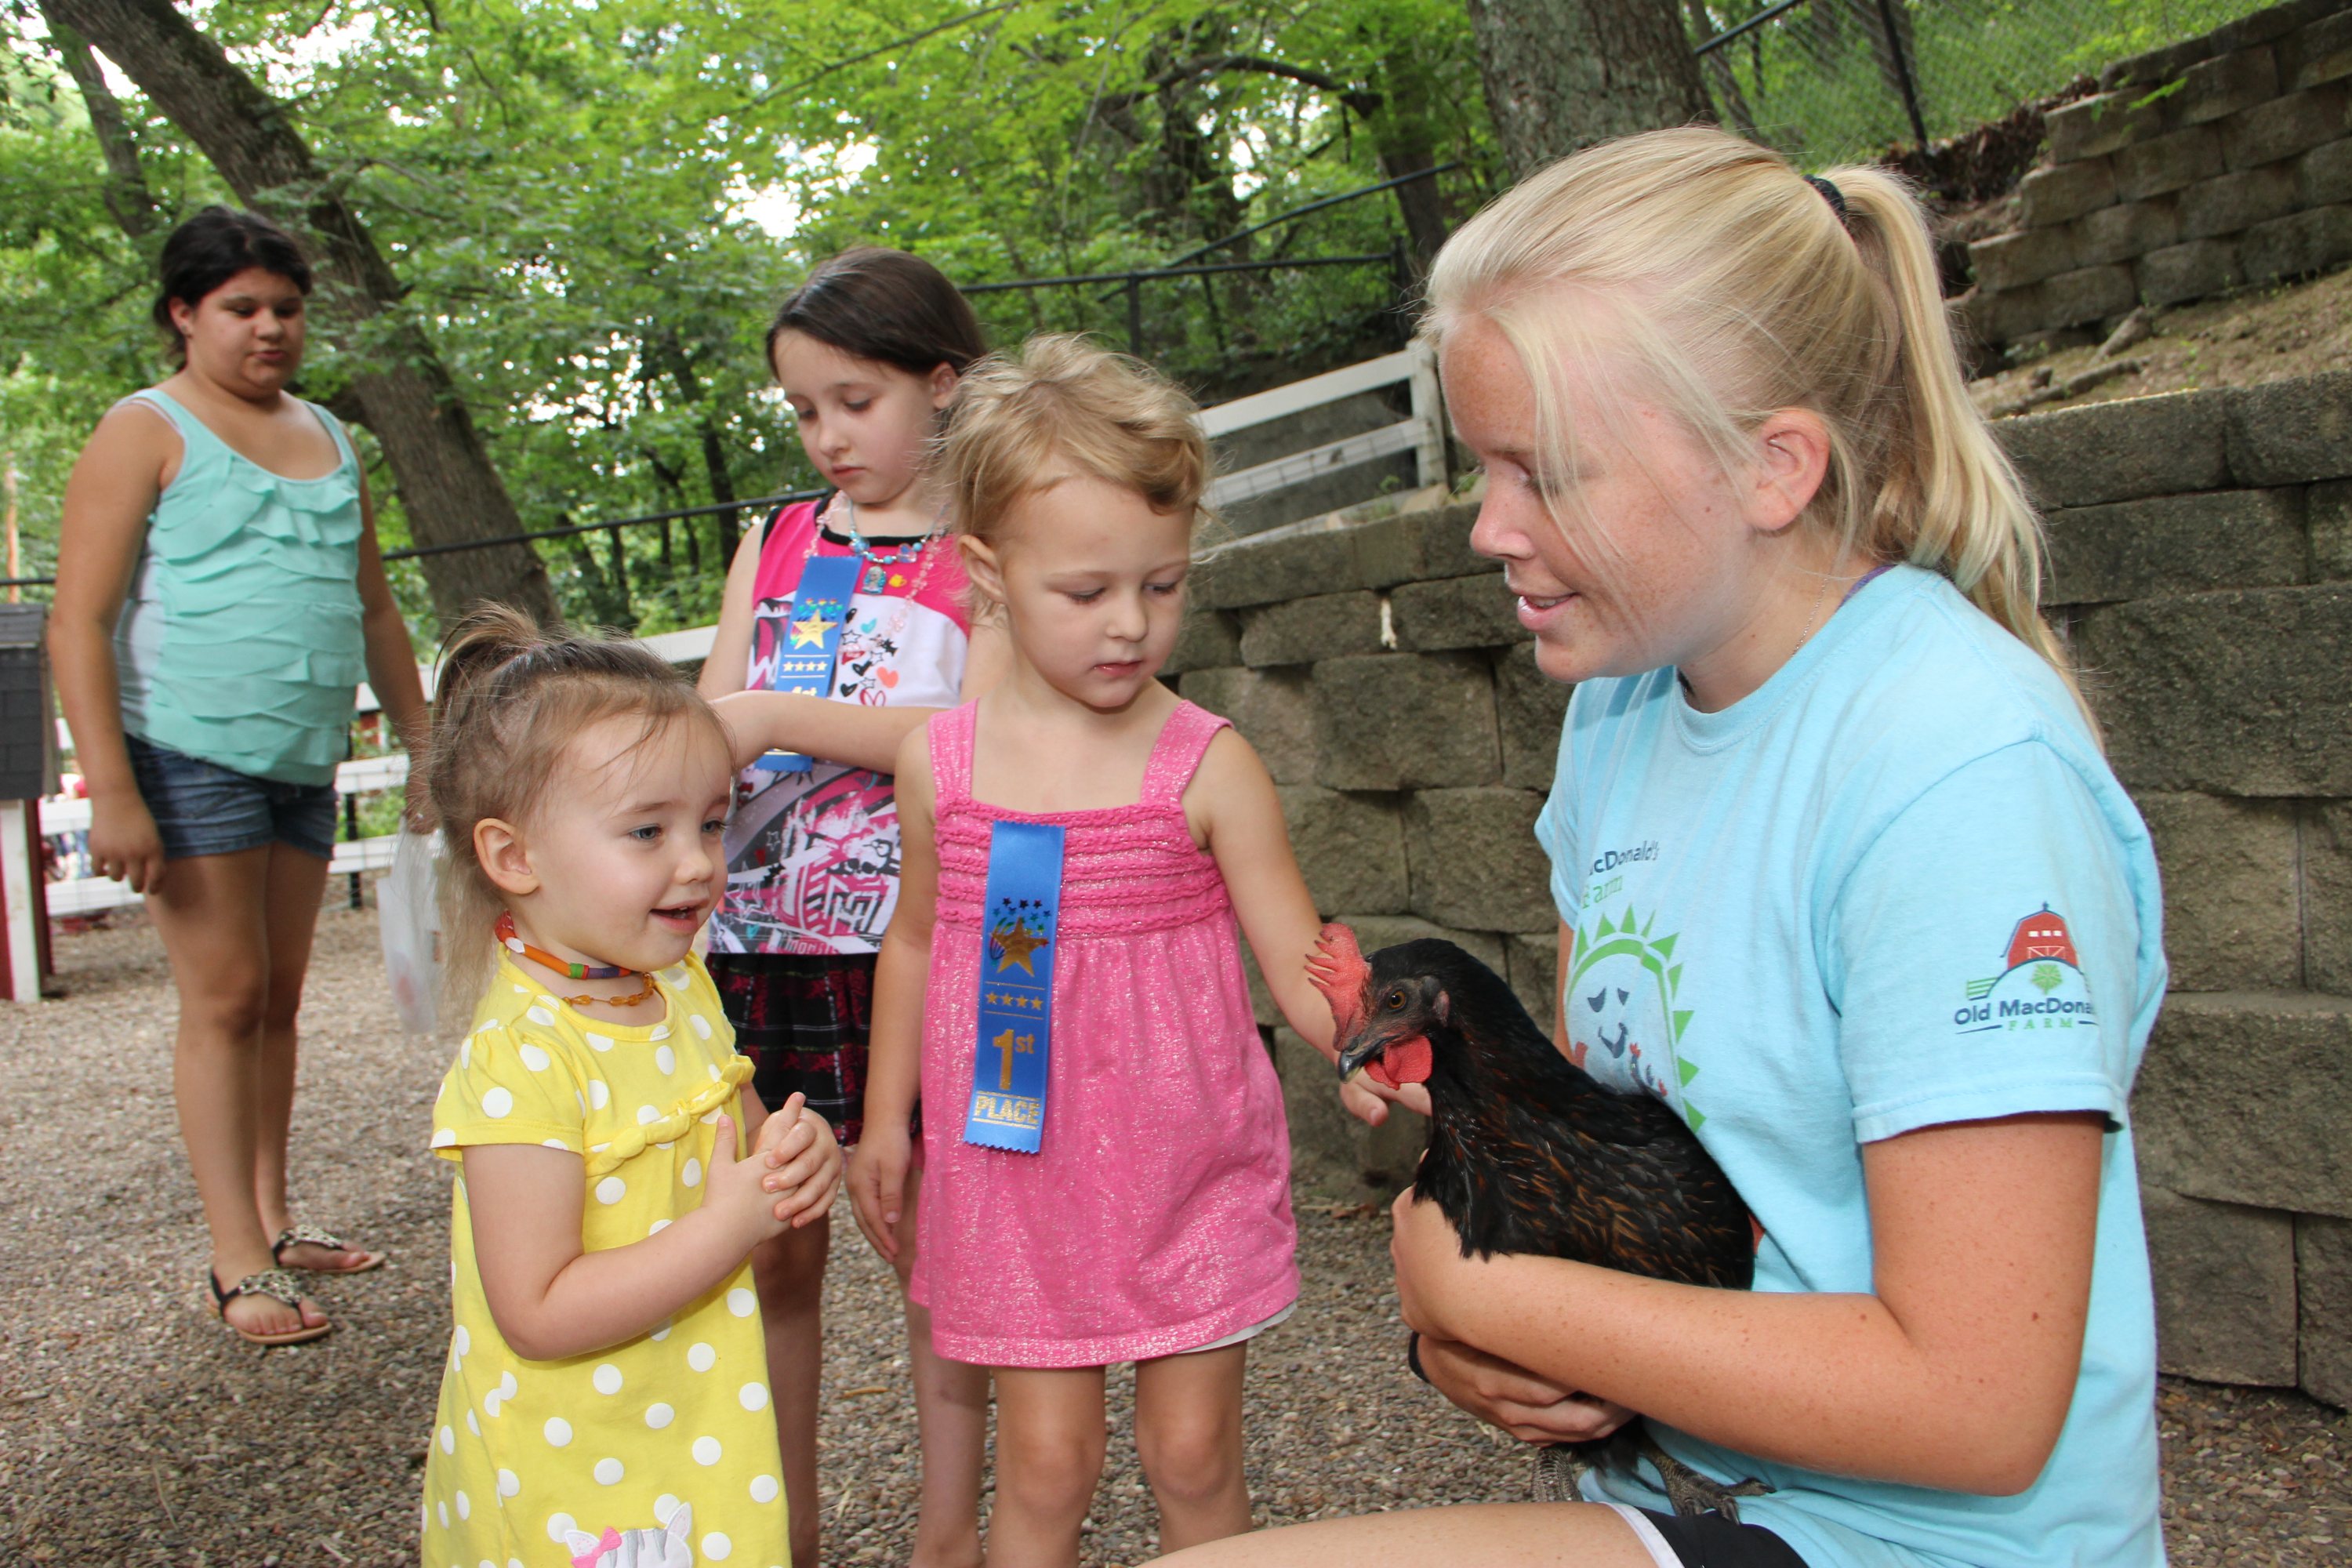 Children petting rooster